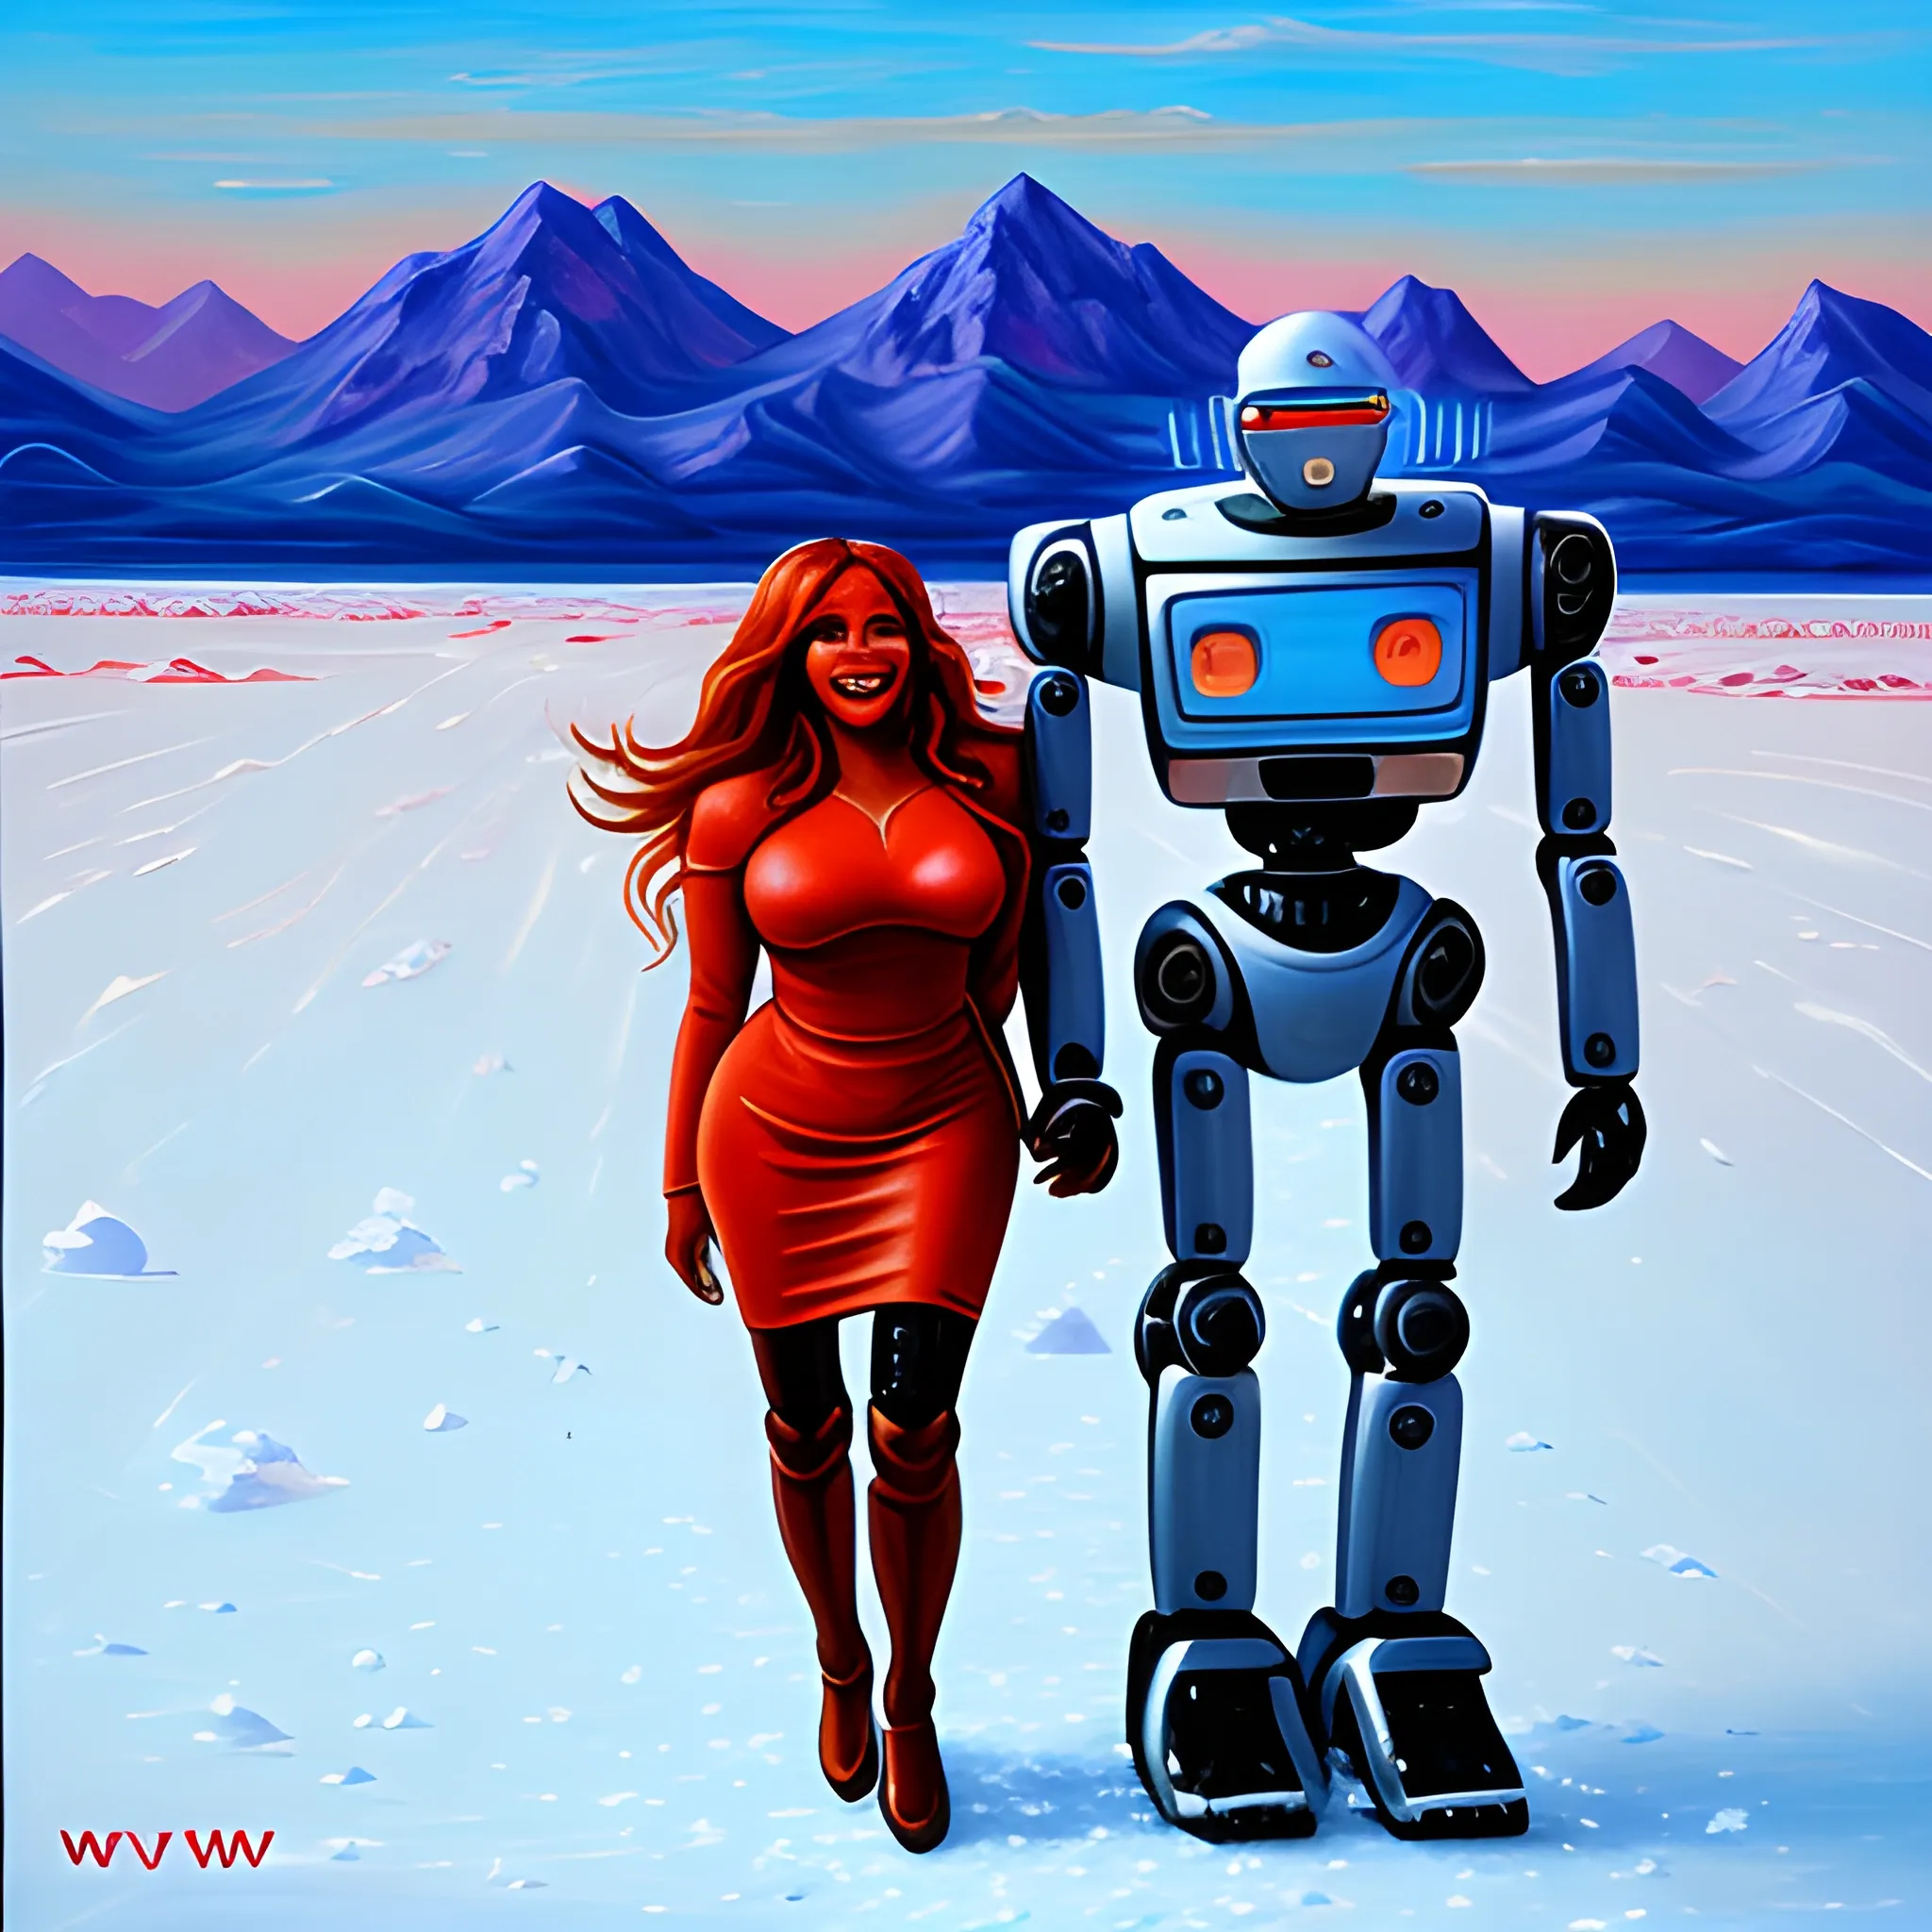 wendy williams being picked up by a robot in an icy desert, oil painting